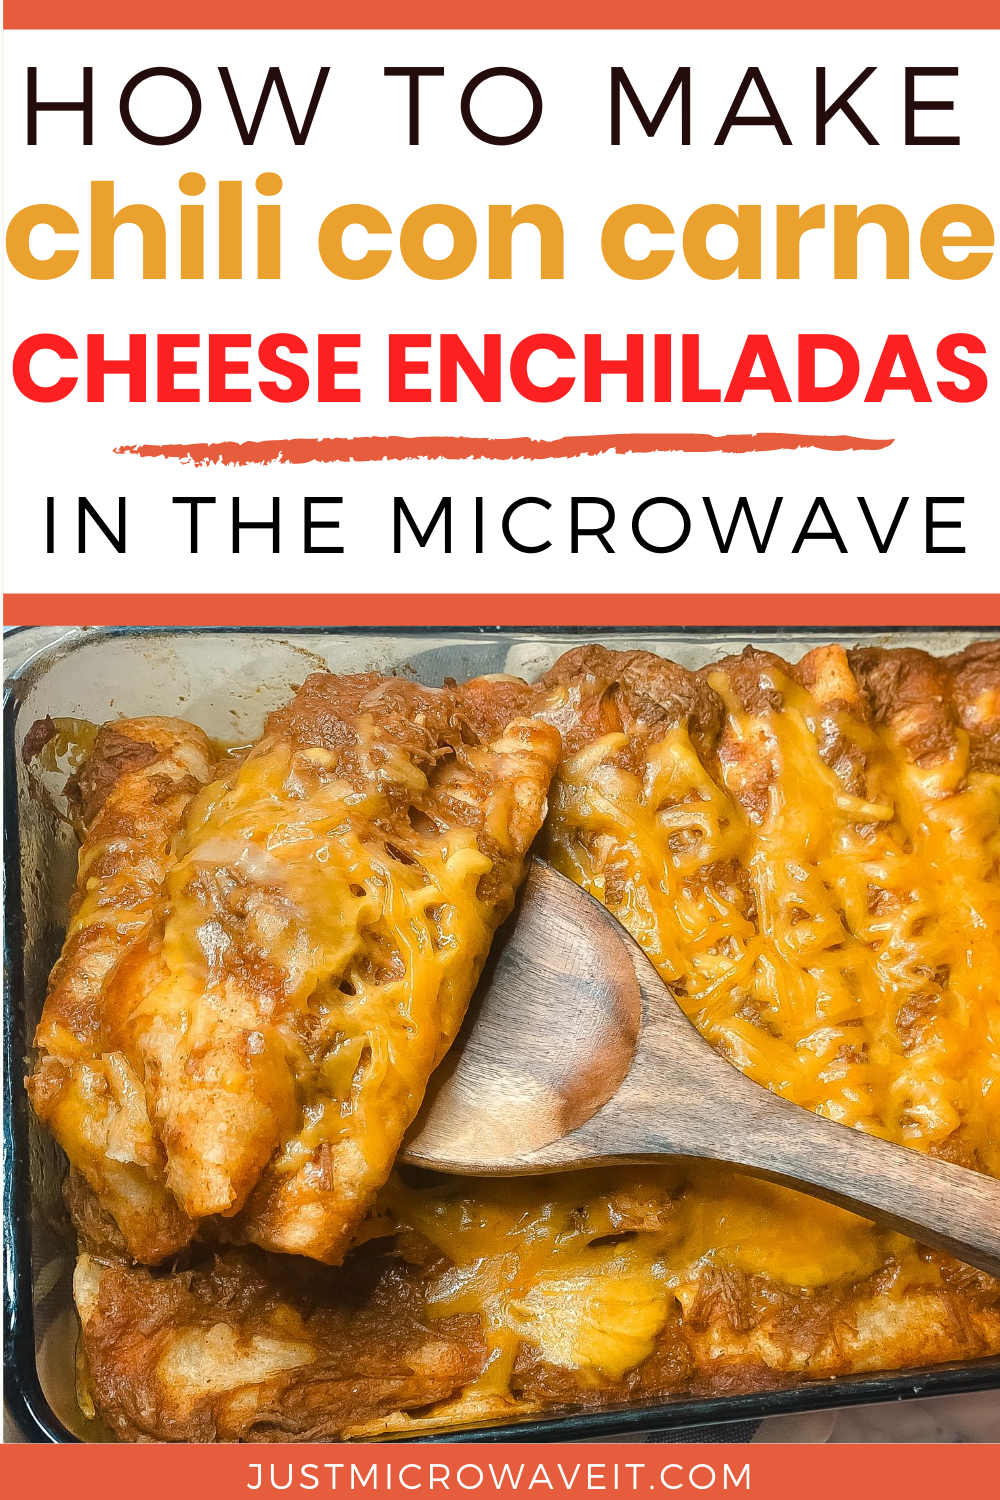 Chili Con Carne Cheese Enchiladas in the Microwave | Just Microwave It